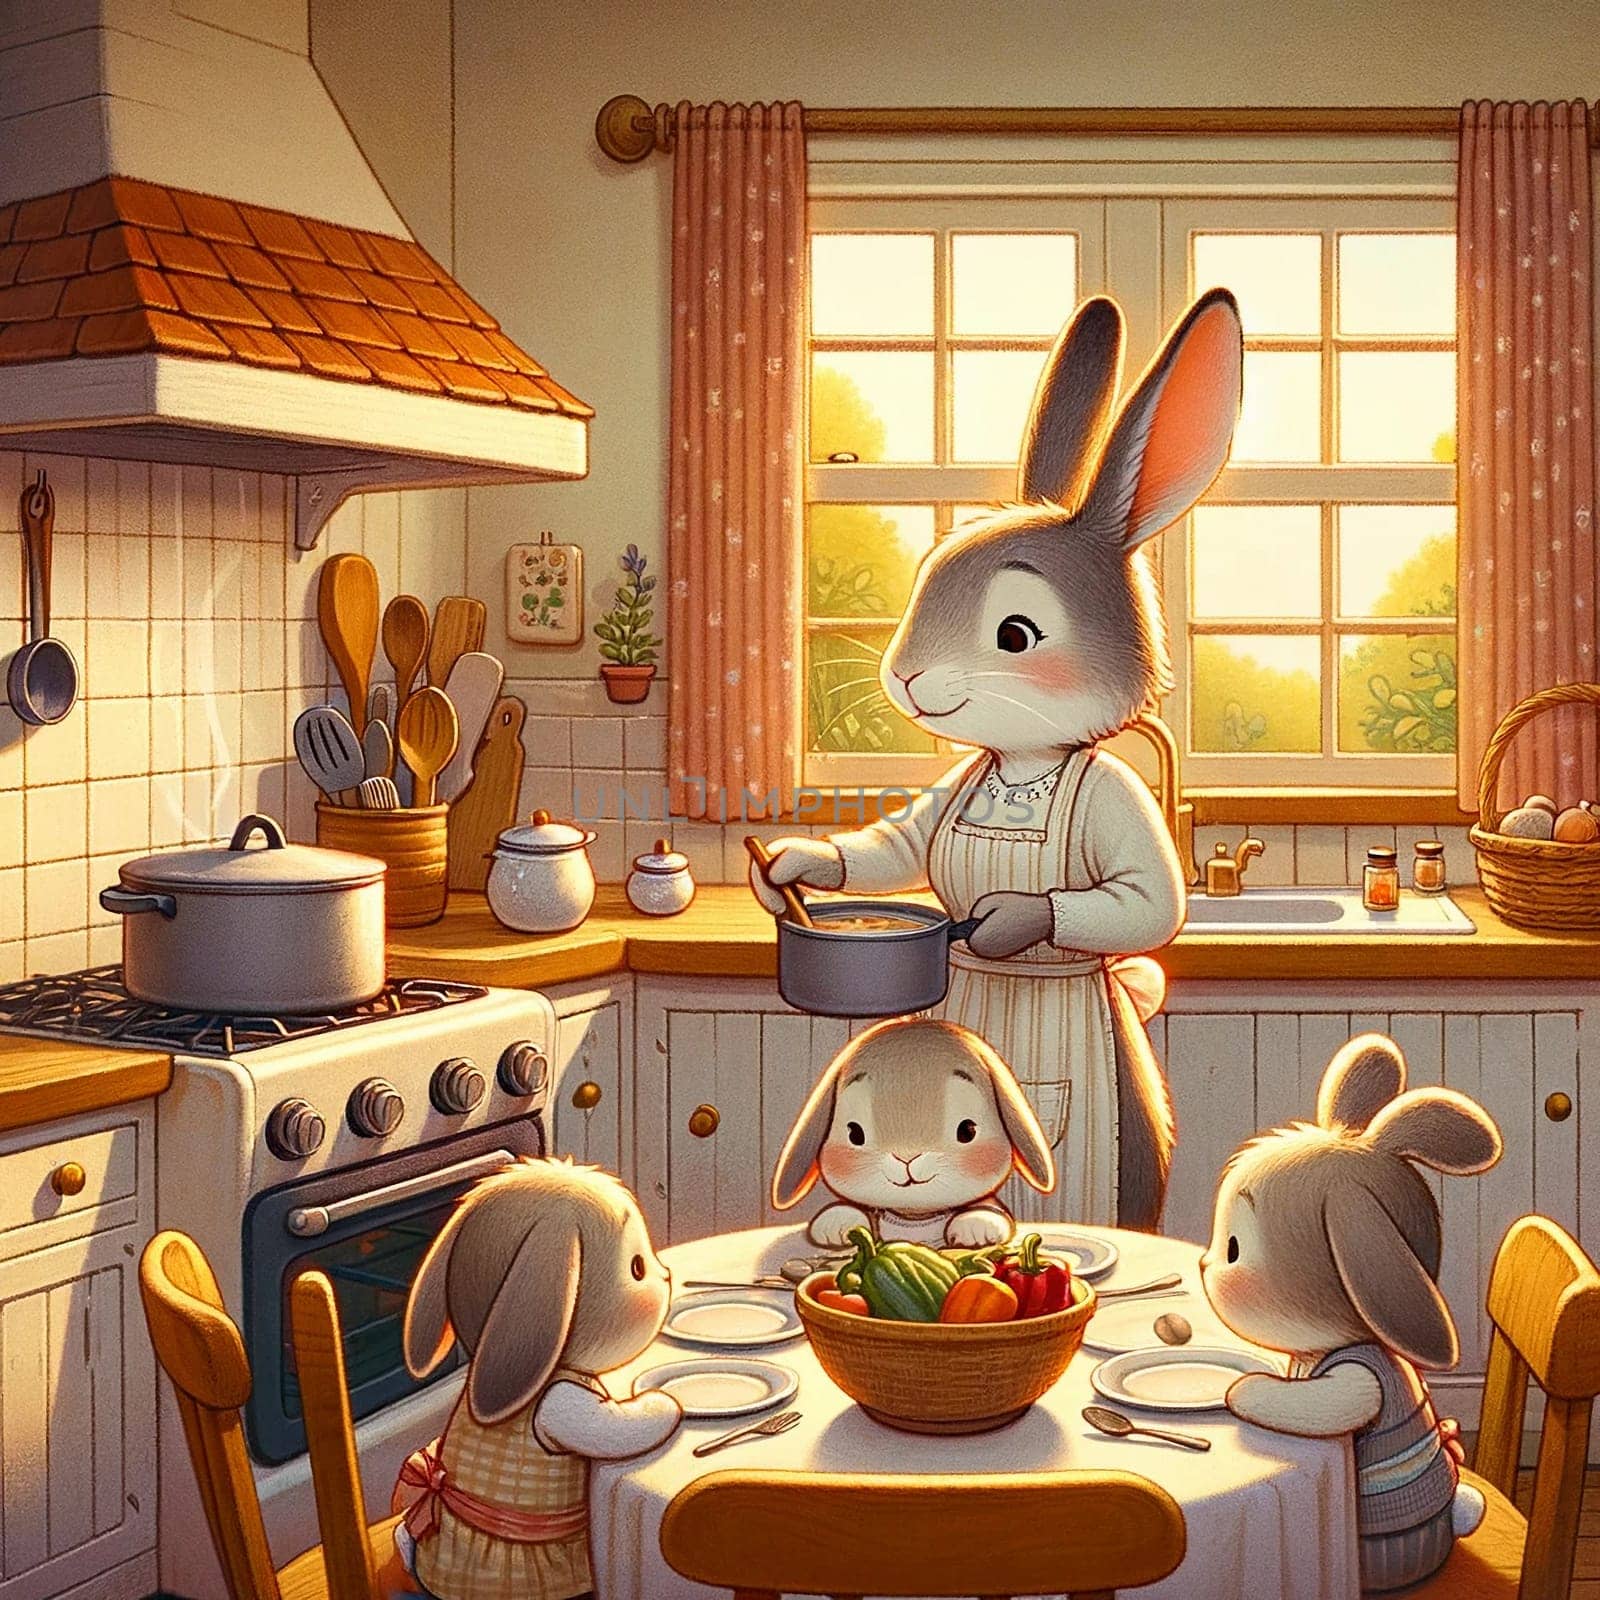 Mother Rabbit Cooking a Meal in a Cozy Kitchen by Nadtochiy